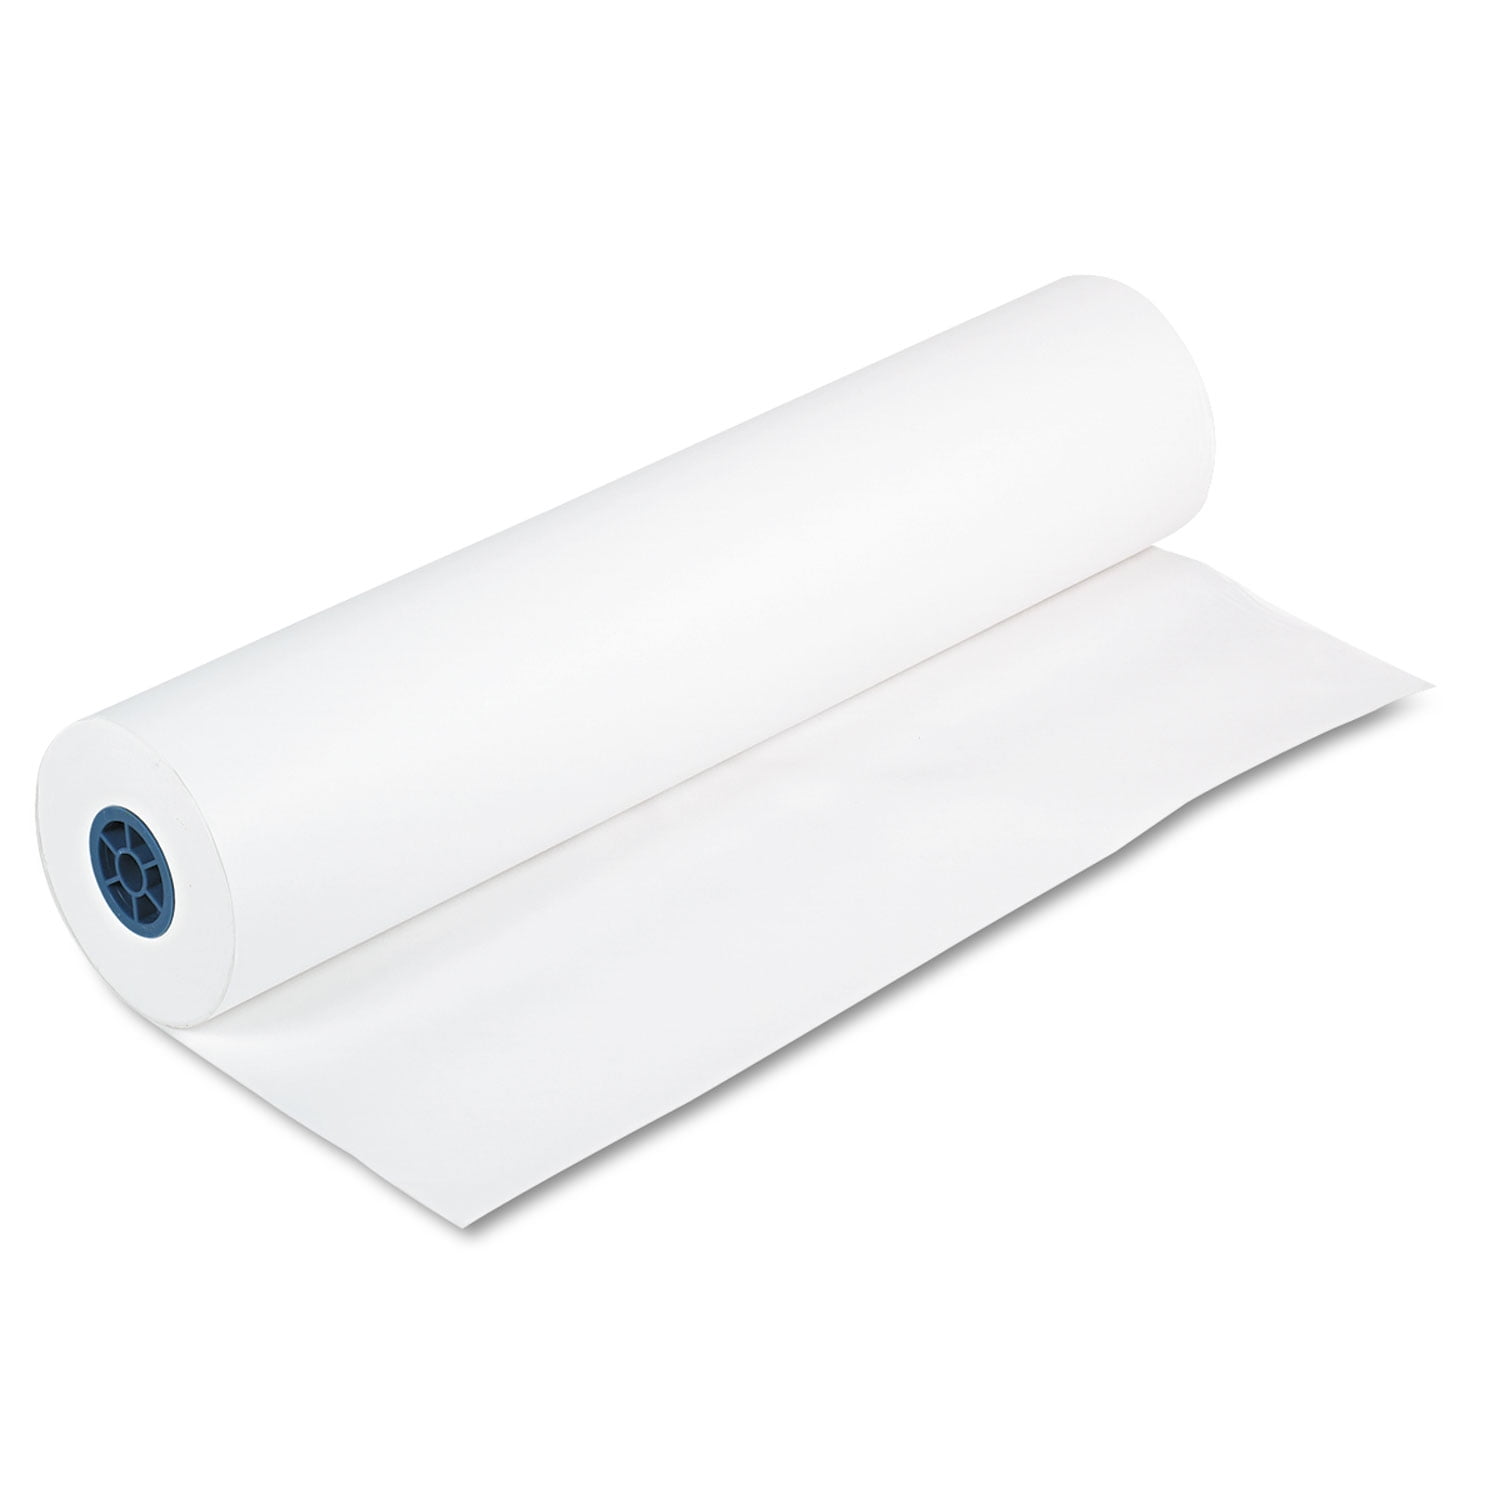 656020 - 36 wide x 900 ft. Kraft 40 lb Weight Paper Rolls - RETAIL  SUPPLIES by WR Display & Packaging